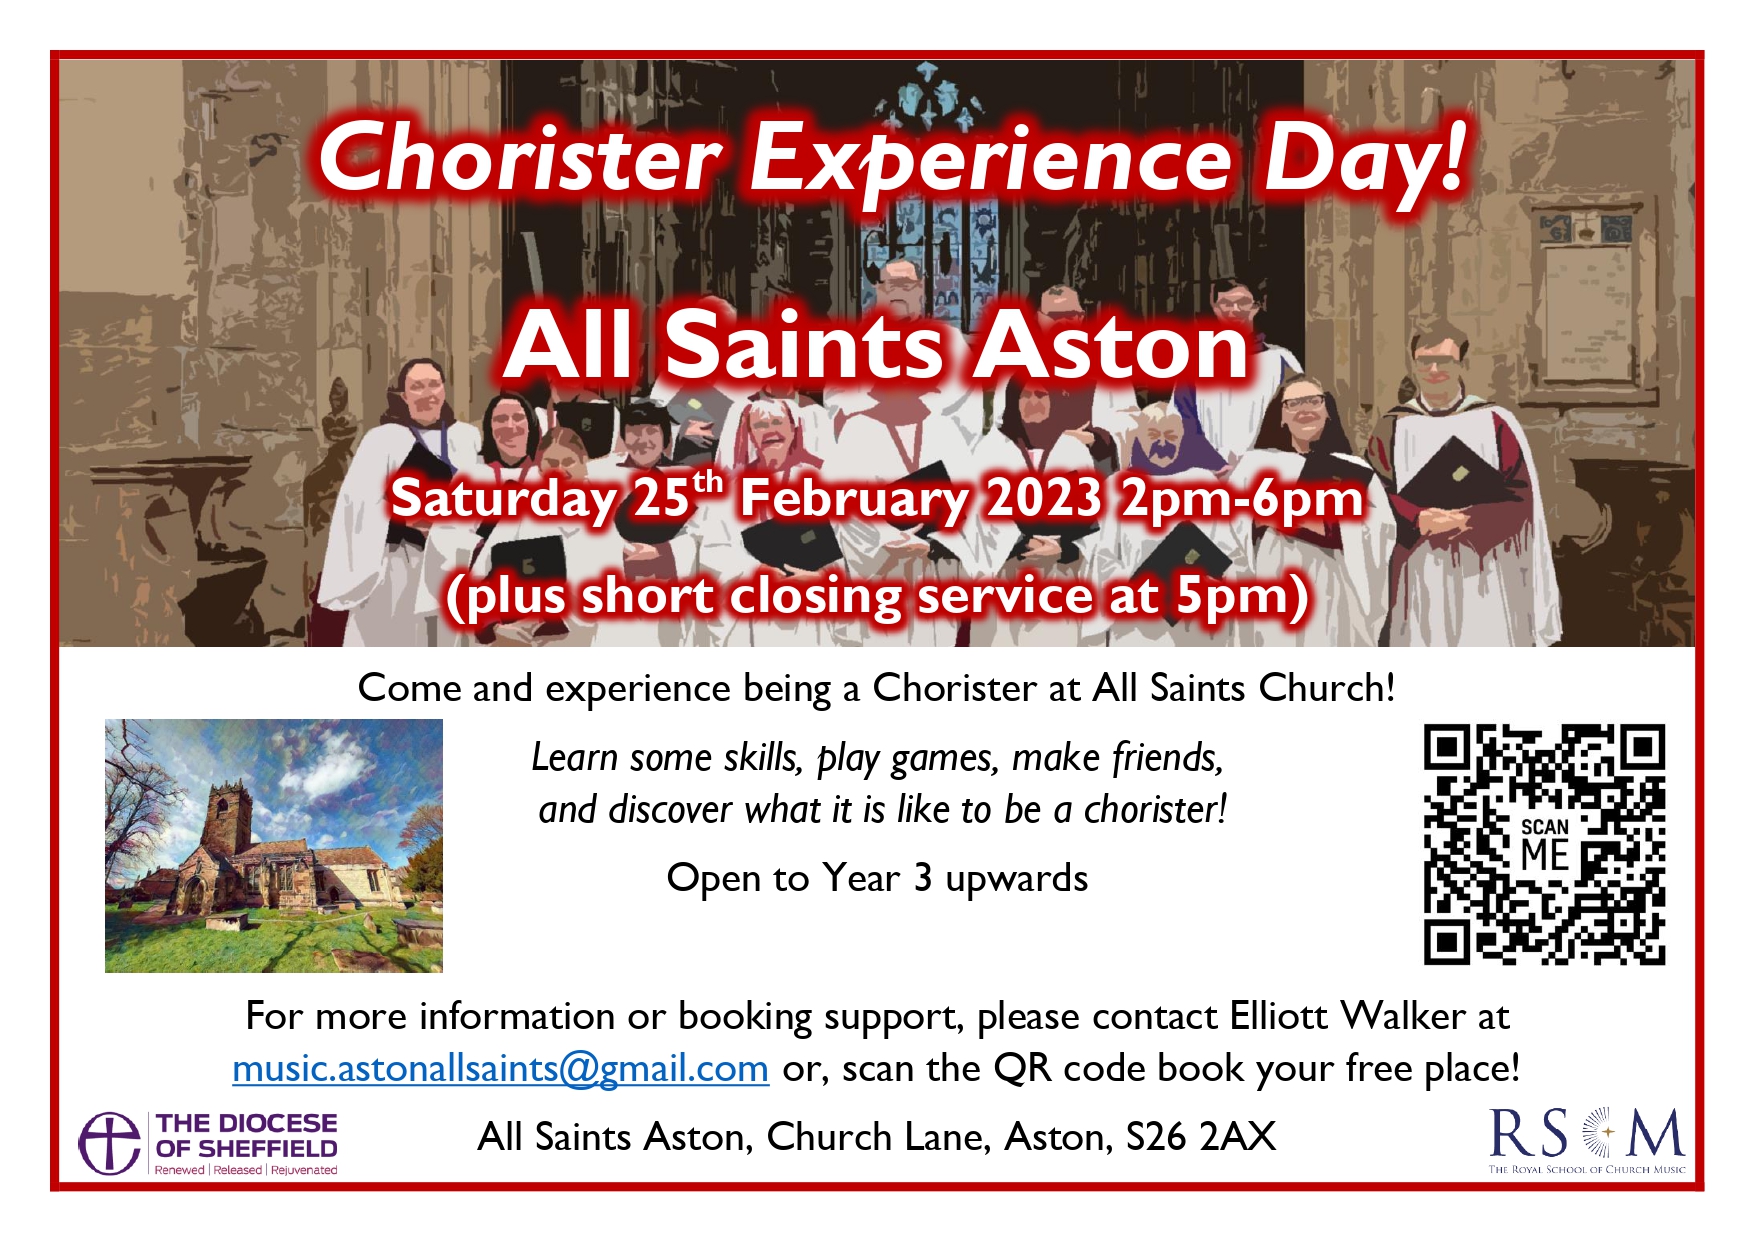 Chorister Experience day 2023